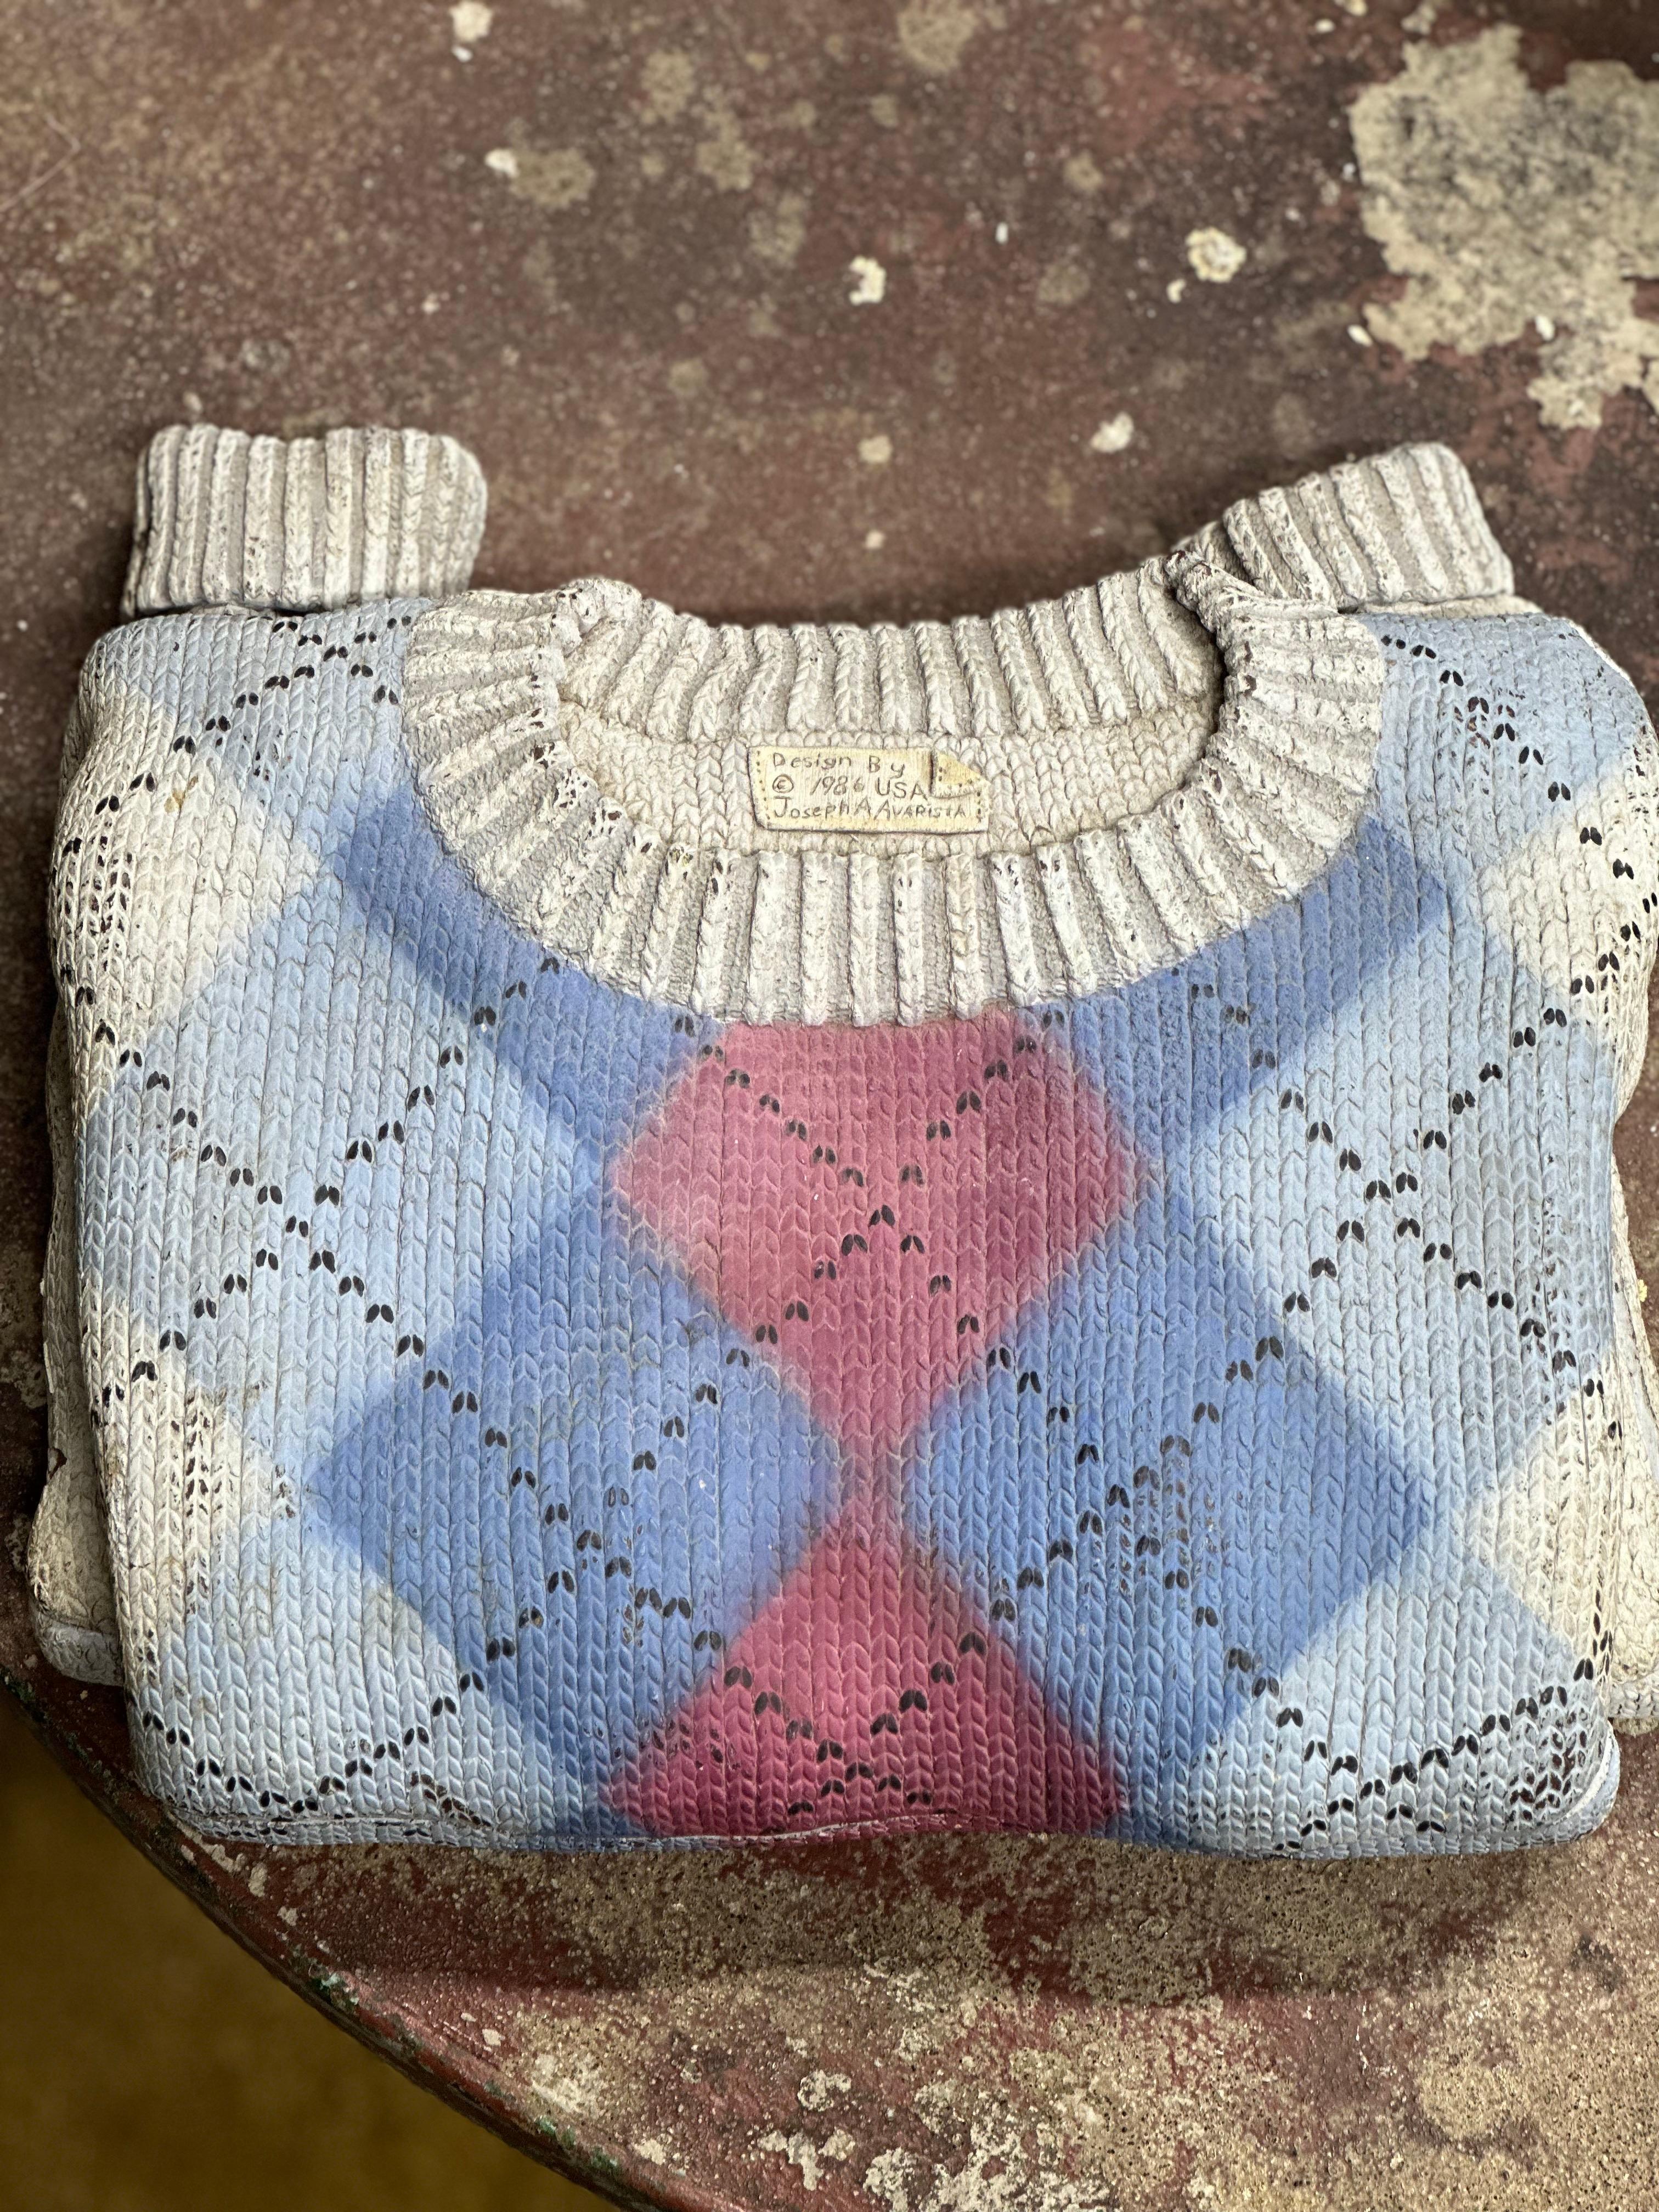 Wooden carved argyle sweater carved and painted by Joe A Avarista. Avarista was commissioned to make a series of sweater boxes to house a set of rare ink pens. This box is one of a kind as there are no other sweaters in this style. Joe Avarista is